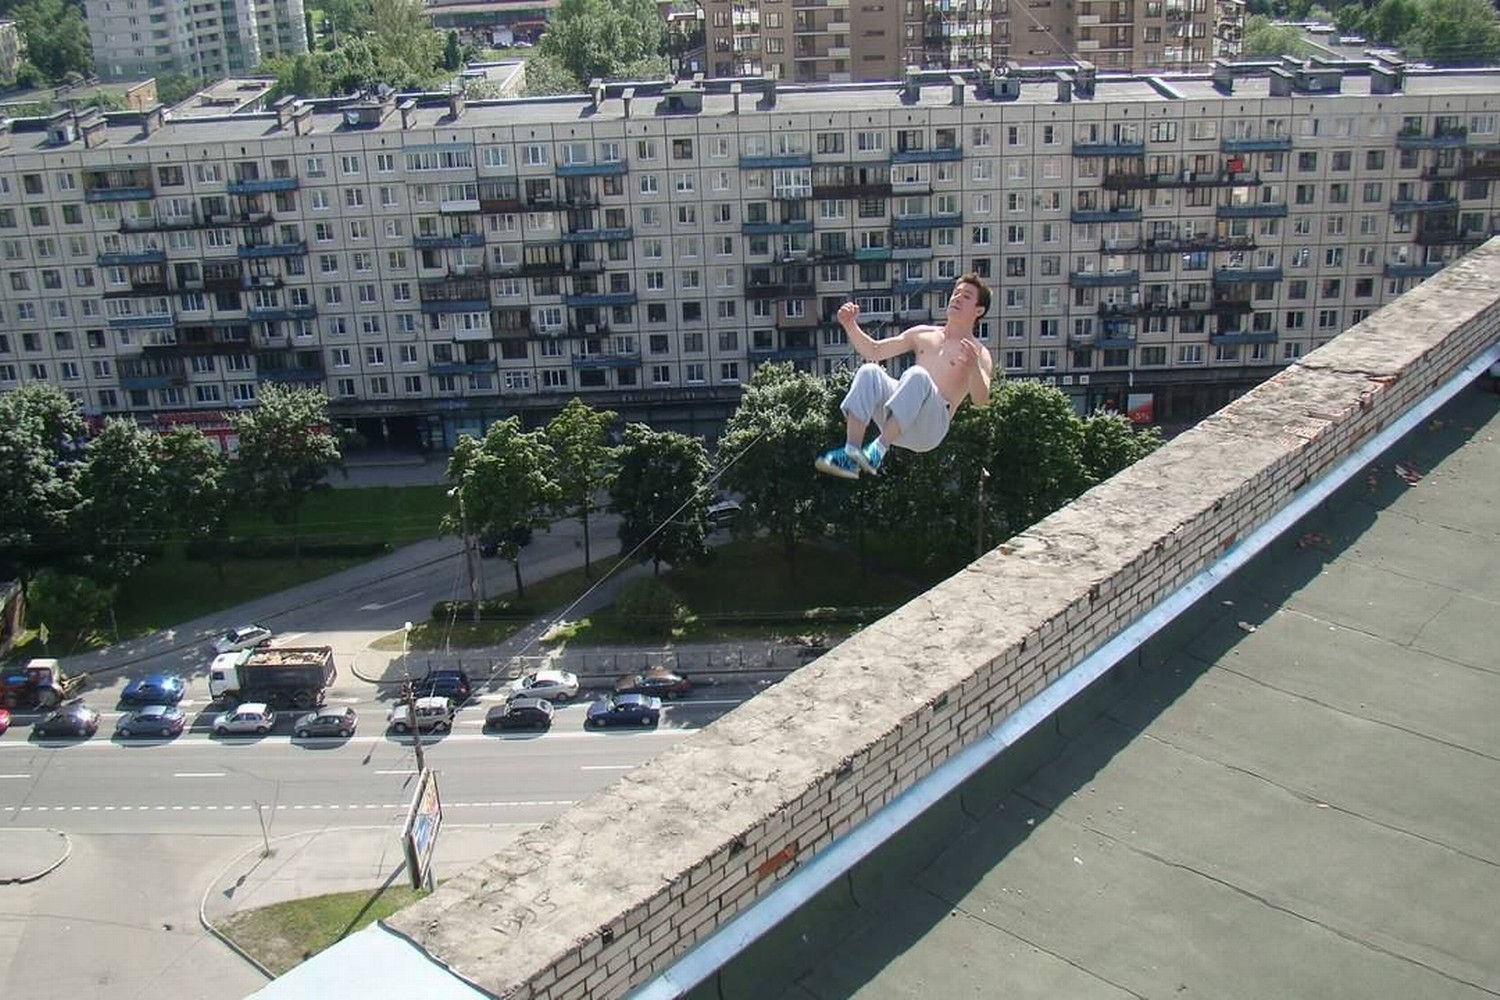 Pavel Kashin's Final Jump: How Parkour Daredevil Lost His Life